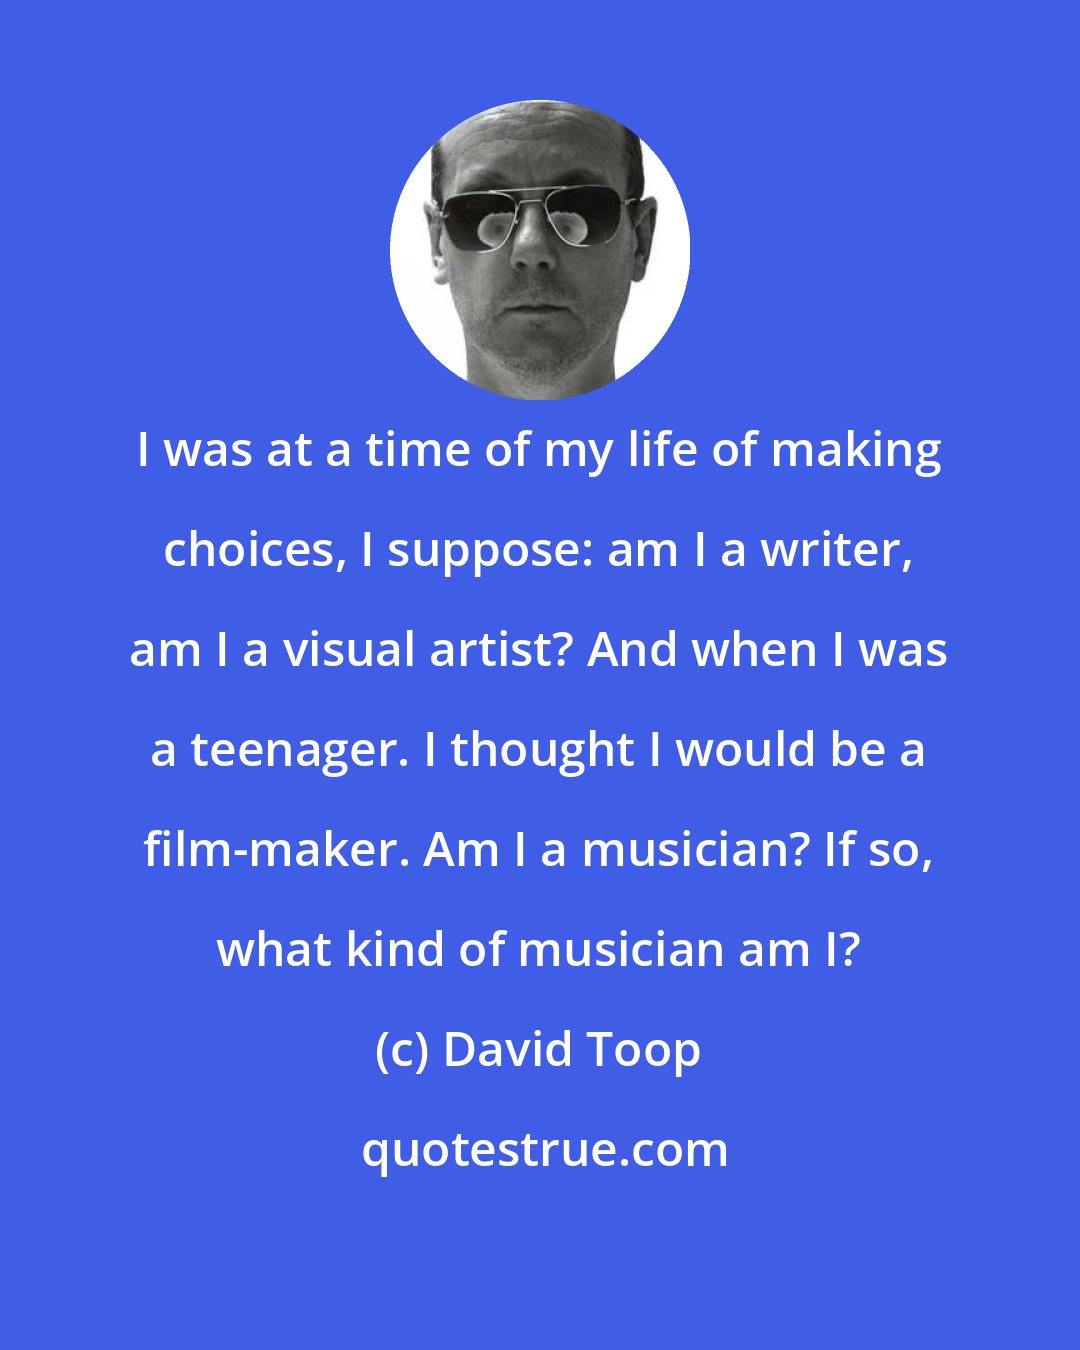 David Toop: I was at a time of my life of making choices, I suppose: am I a writer, am I a visual artist? And when I was a teenager. I thought I would be a film-maker. Am I a musician? If so, what kind of musician am I?